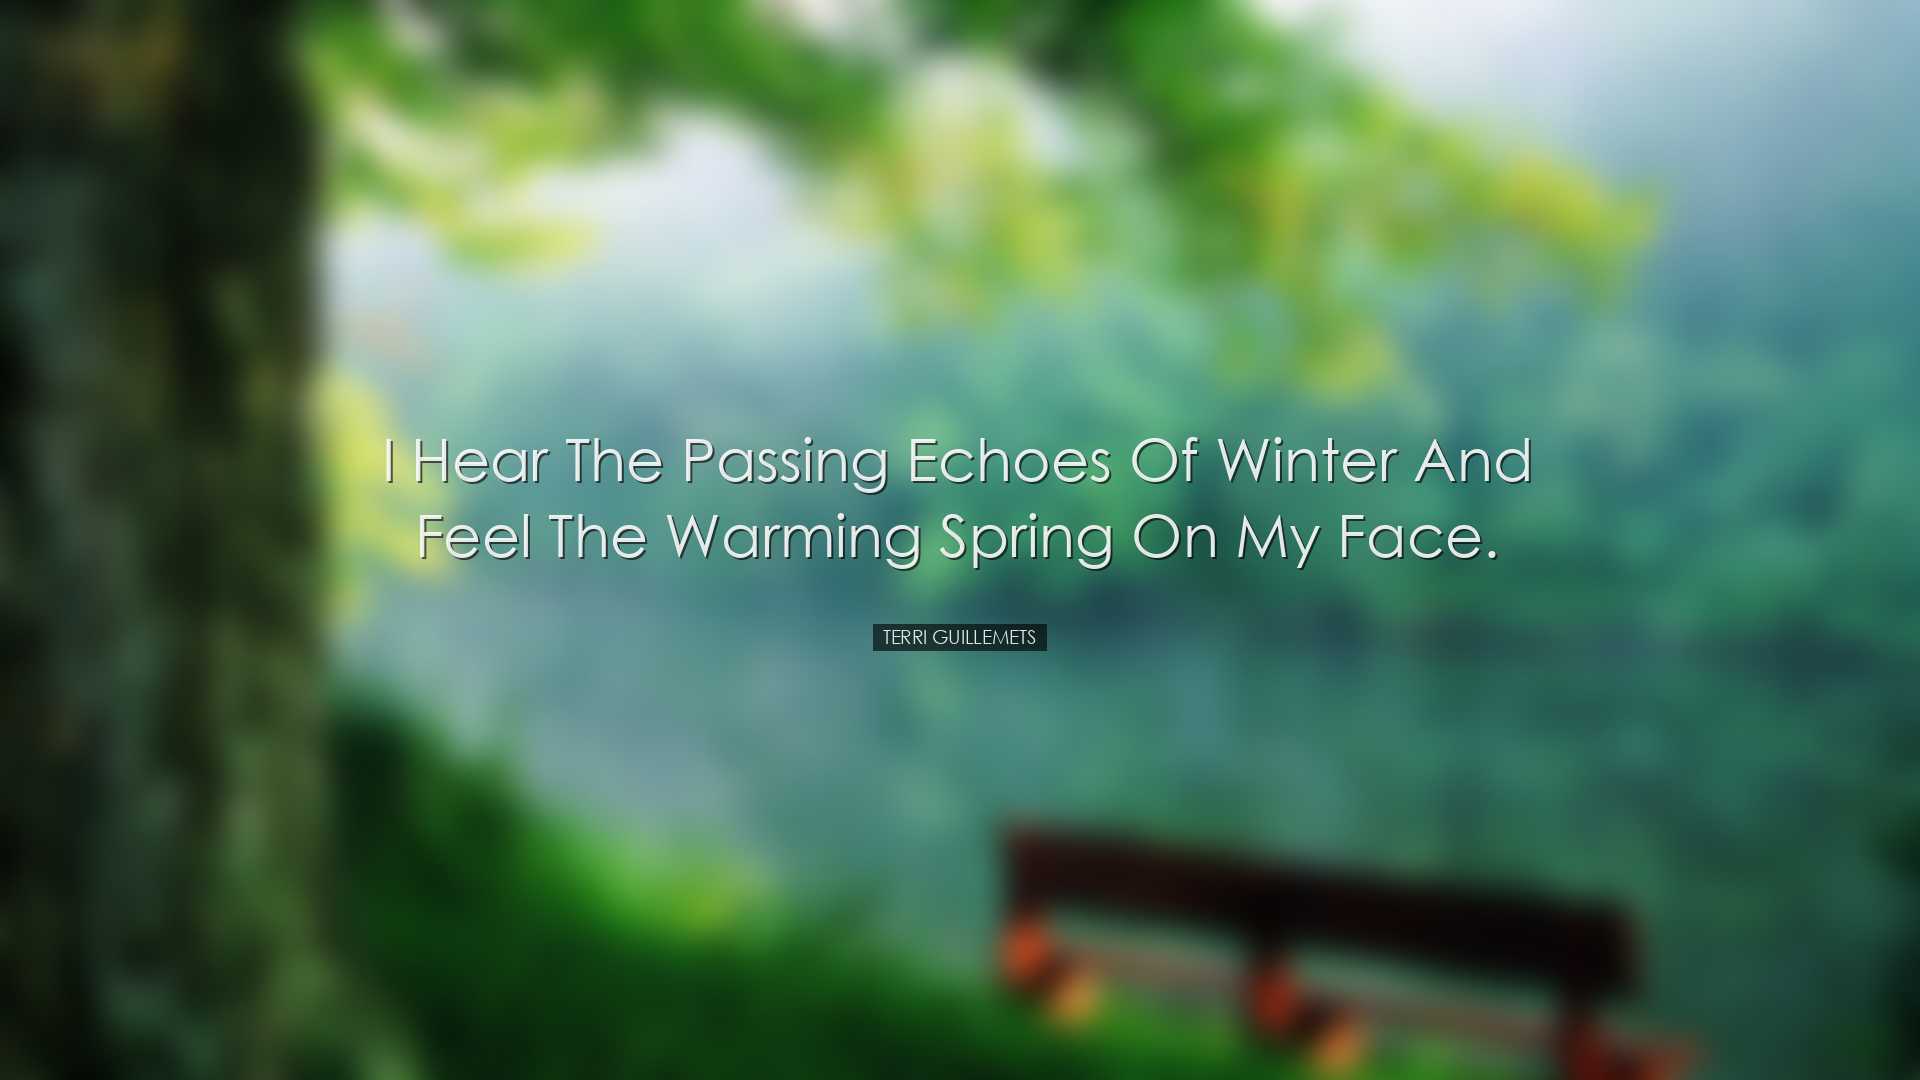 I hear the passing echoes of winter and feel the warming spring on